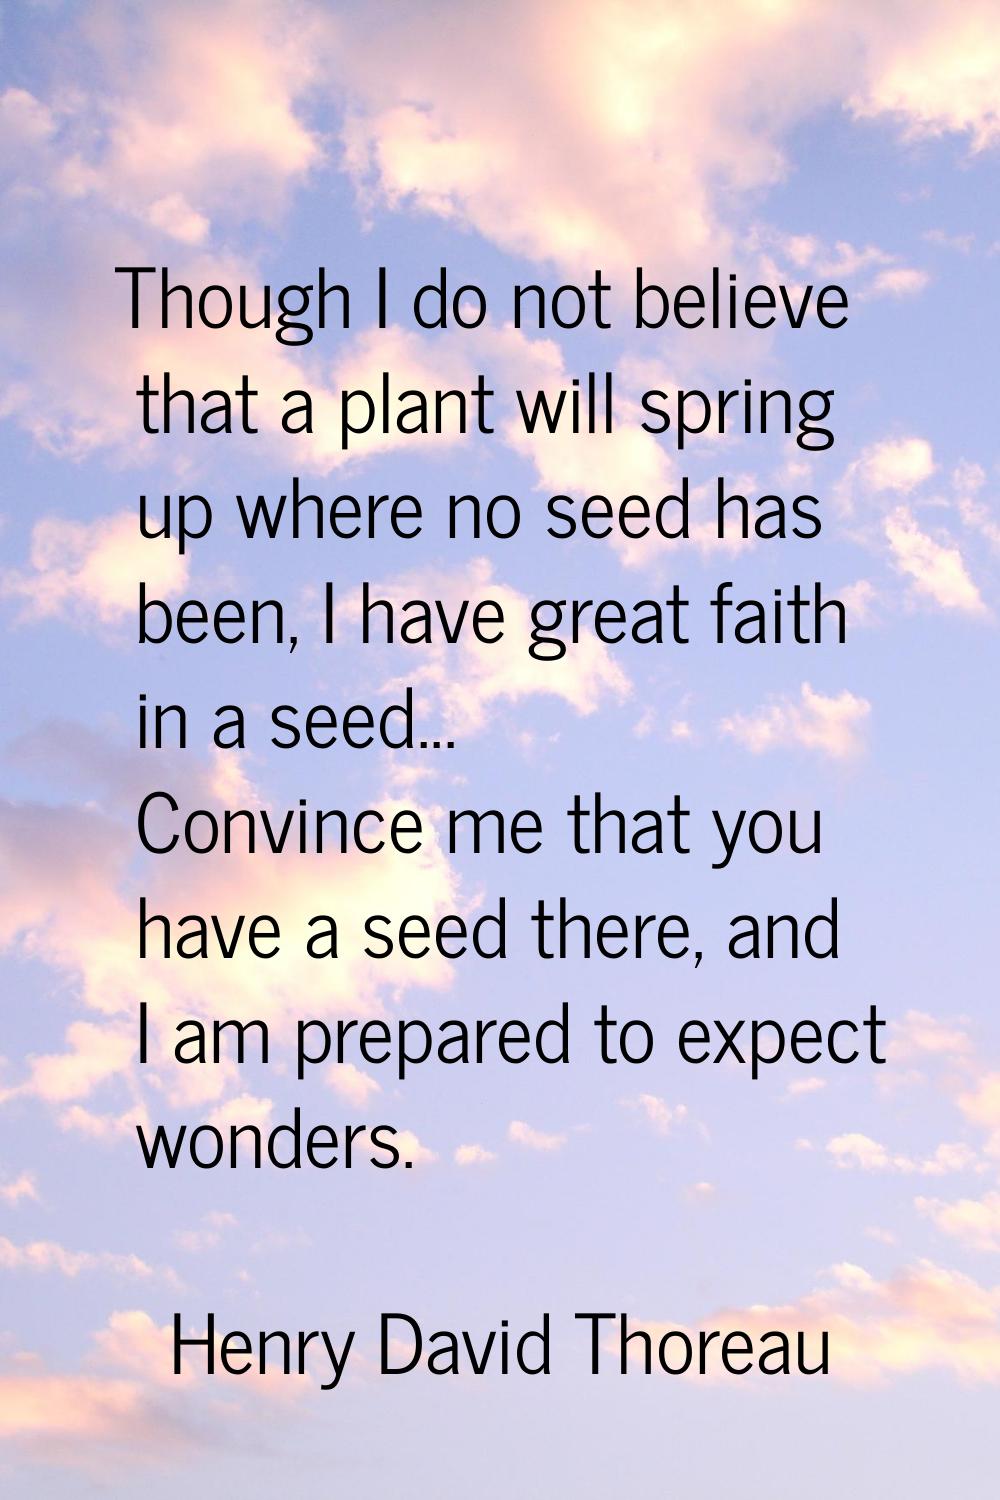 Though I do not believe that a plant will spring up where no seed has been, I have great faith in a